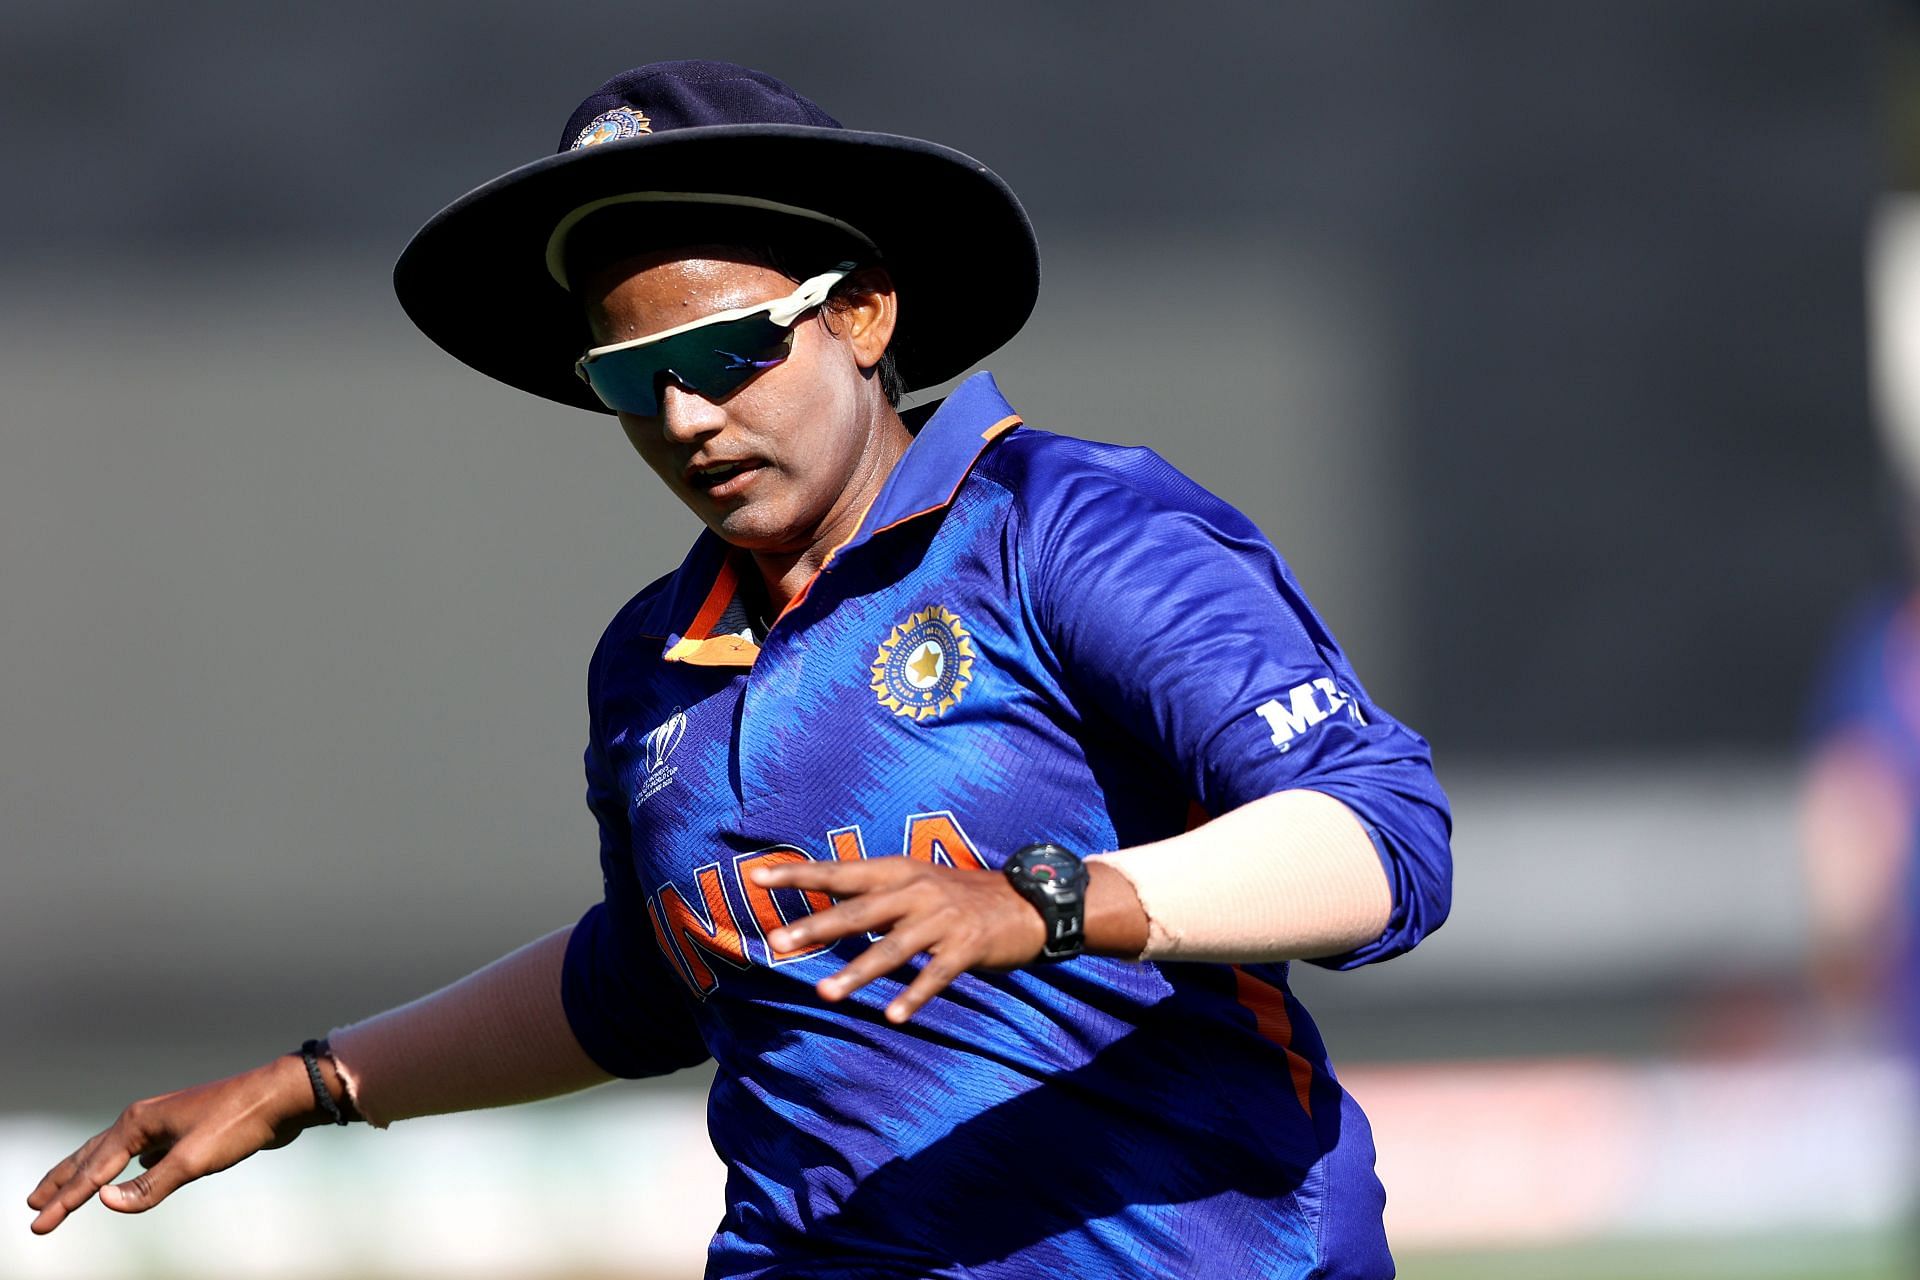 Deepti Sharma's 3 best moments for India